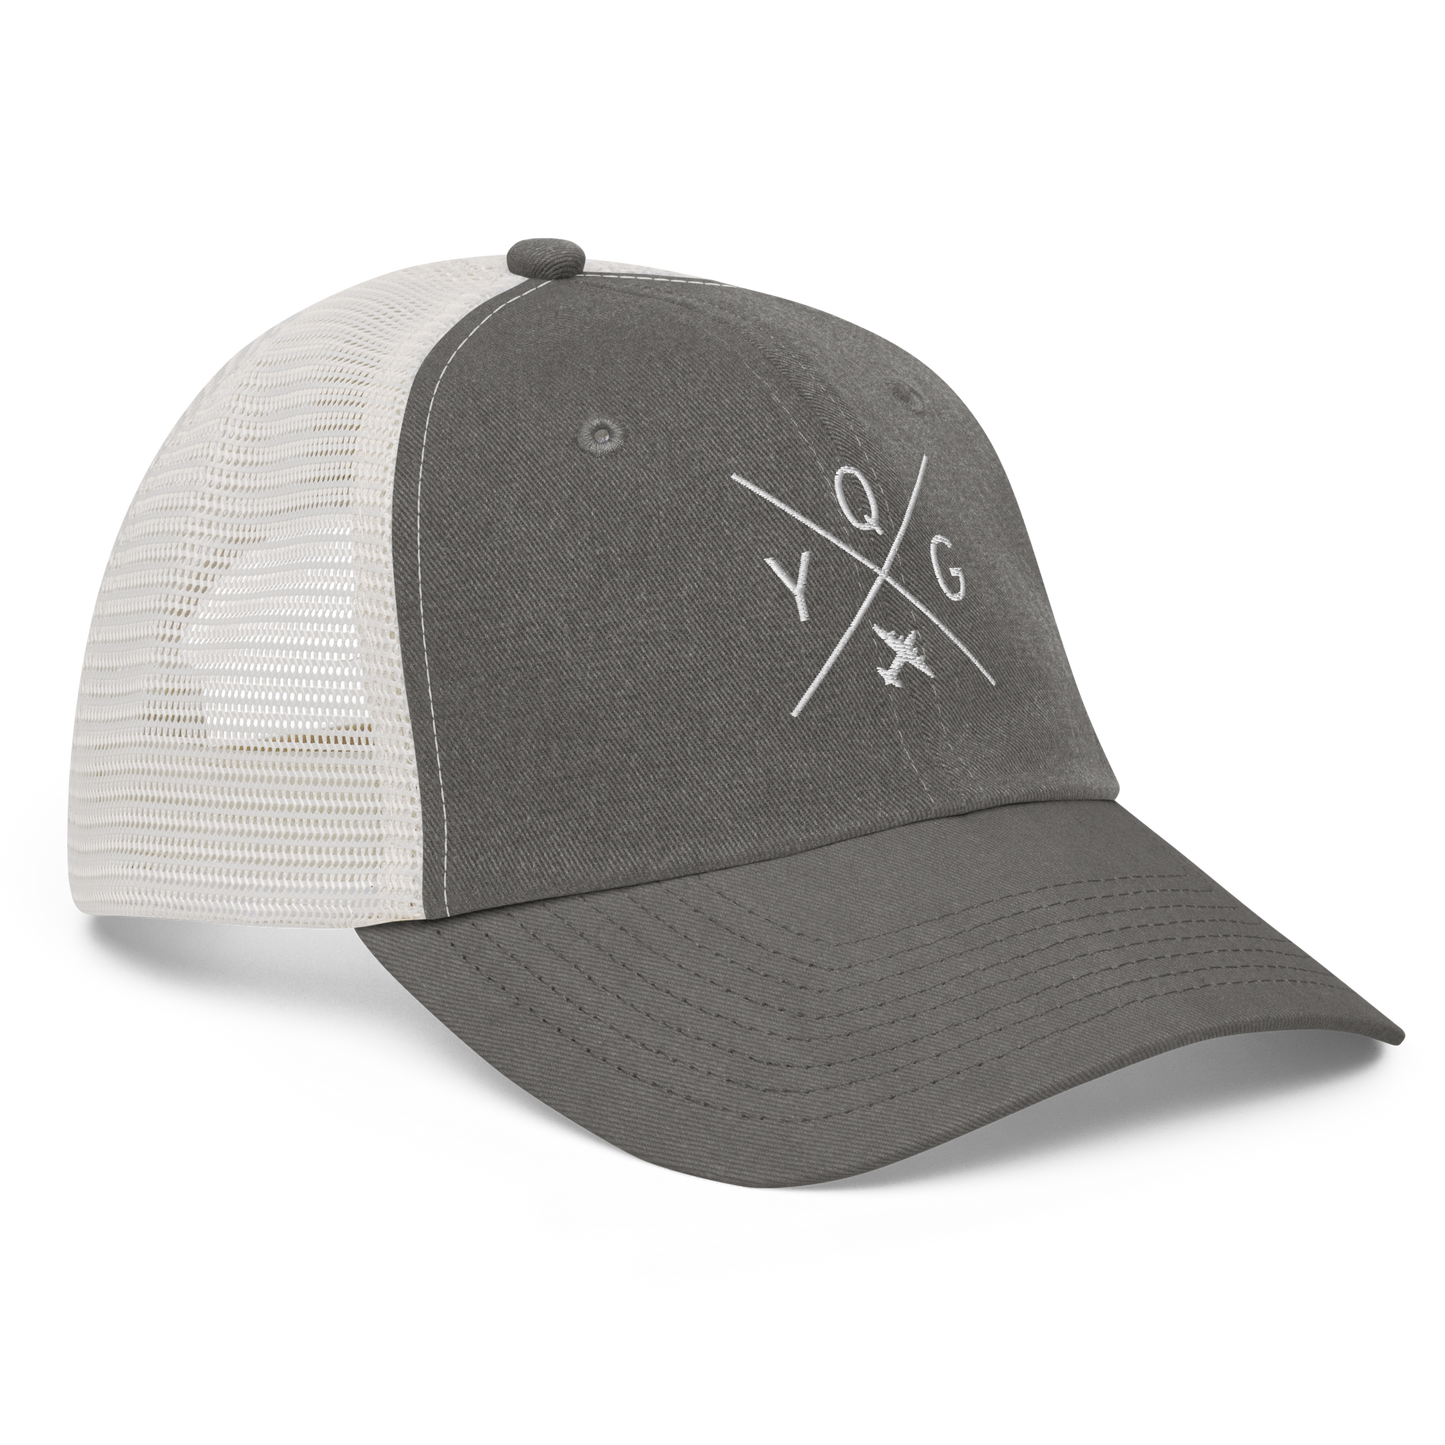 YHM Designs - YQG Windsor Pigment-Dyed Trucker Cap - Crossed-X Design with Airport Code and Vintage Propliner - White Embroidery - Image 10